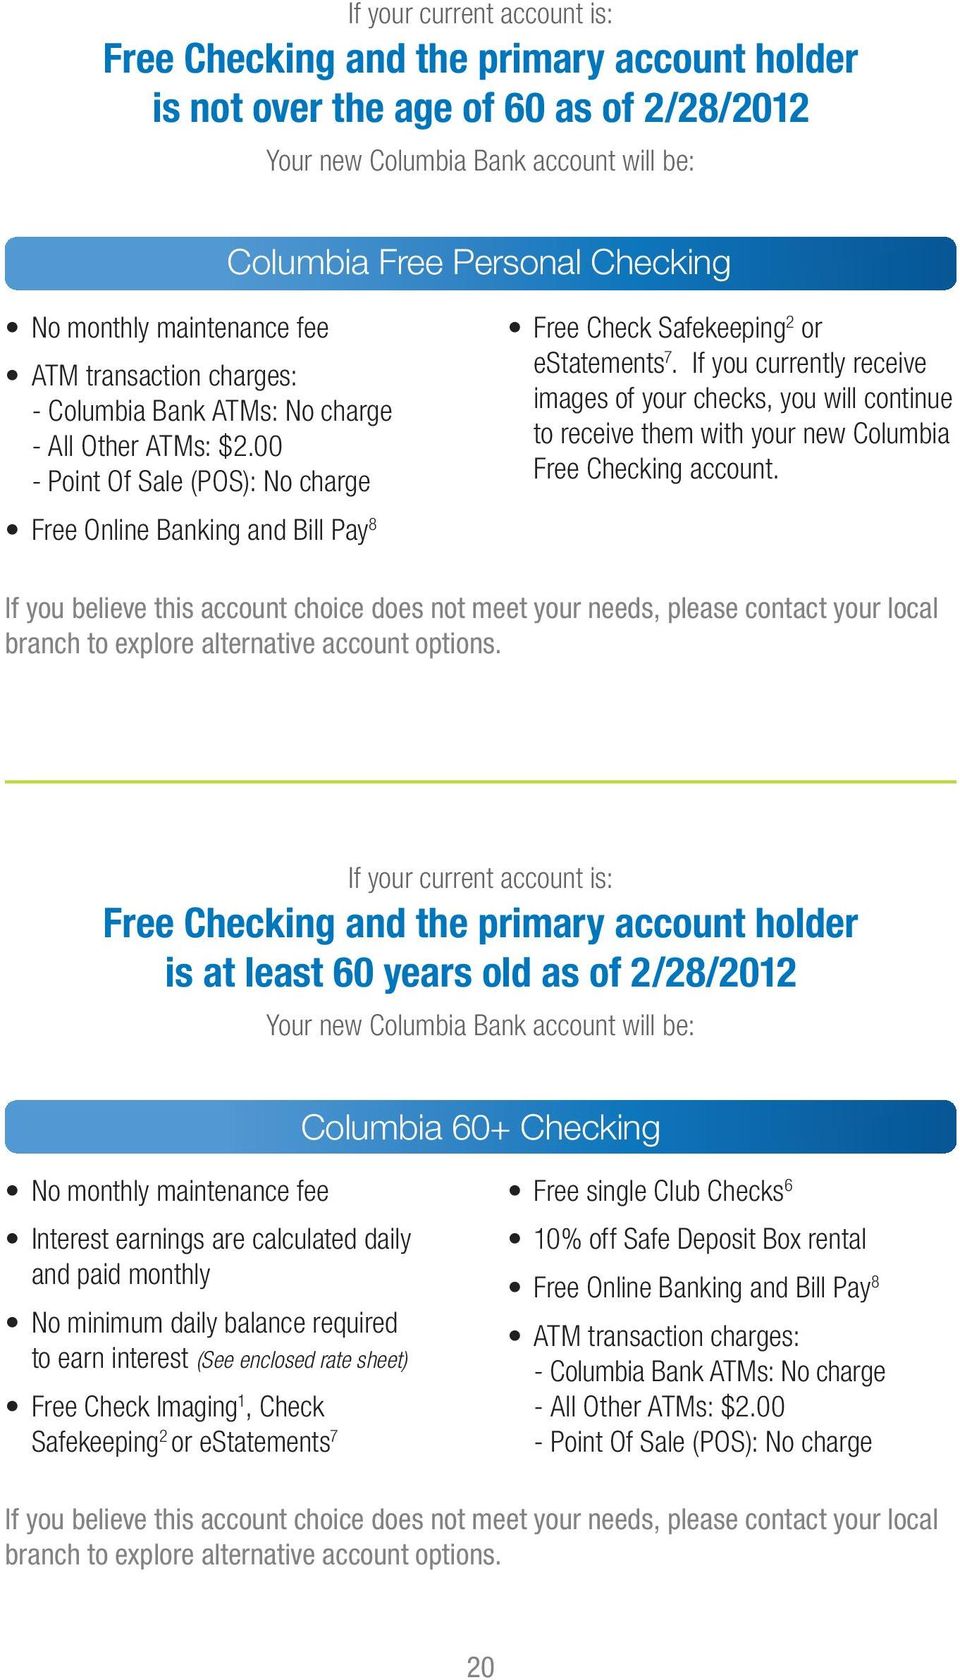 If you currently receive images of your checks, you will continue to receive them with your new Columbia Free